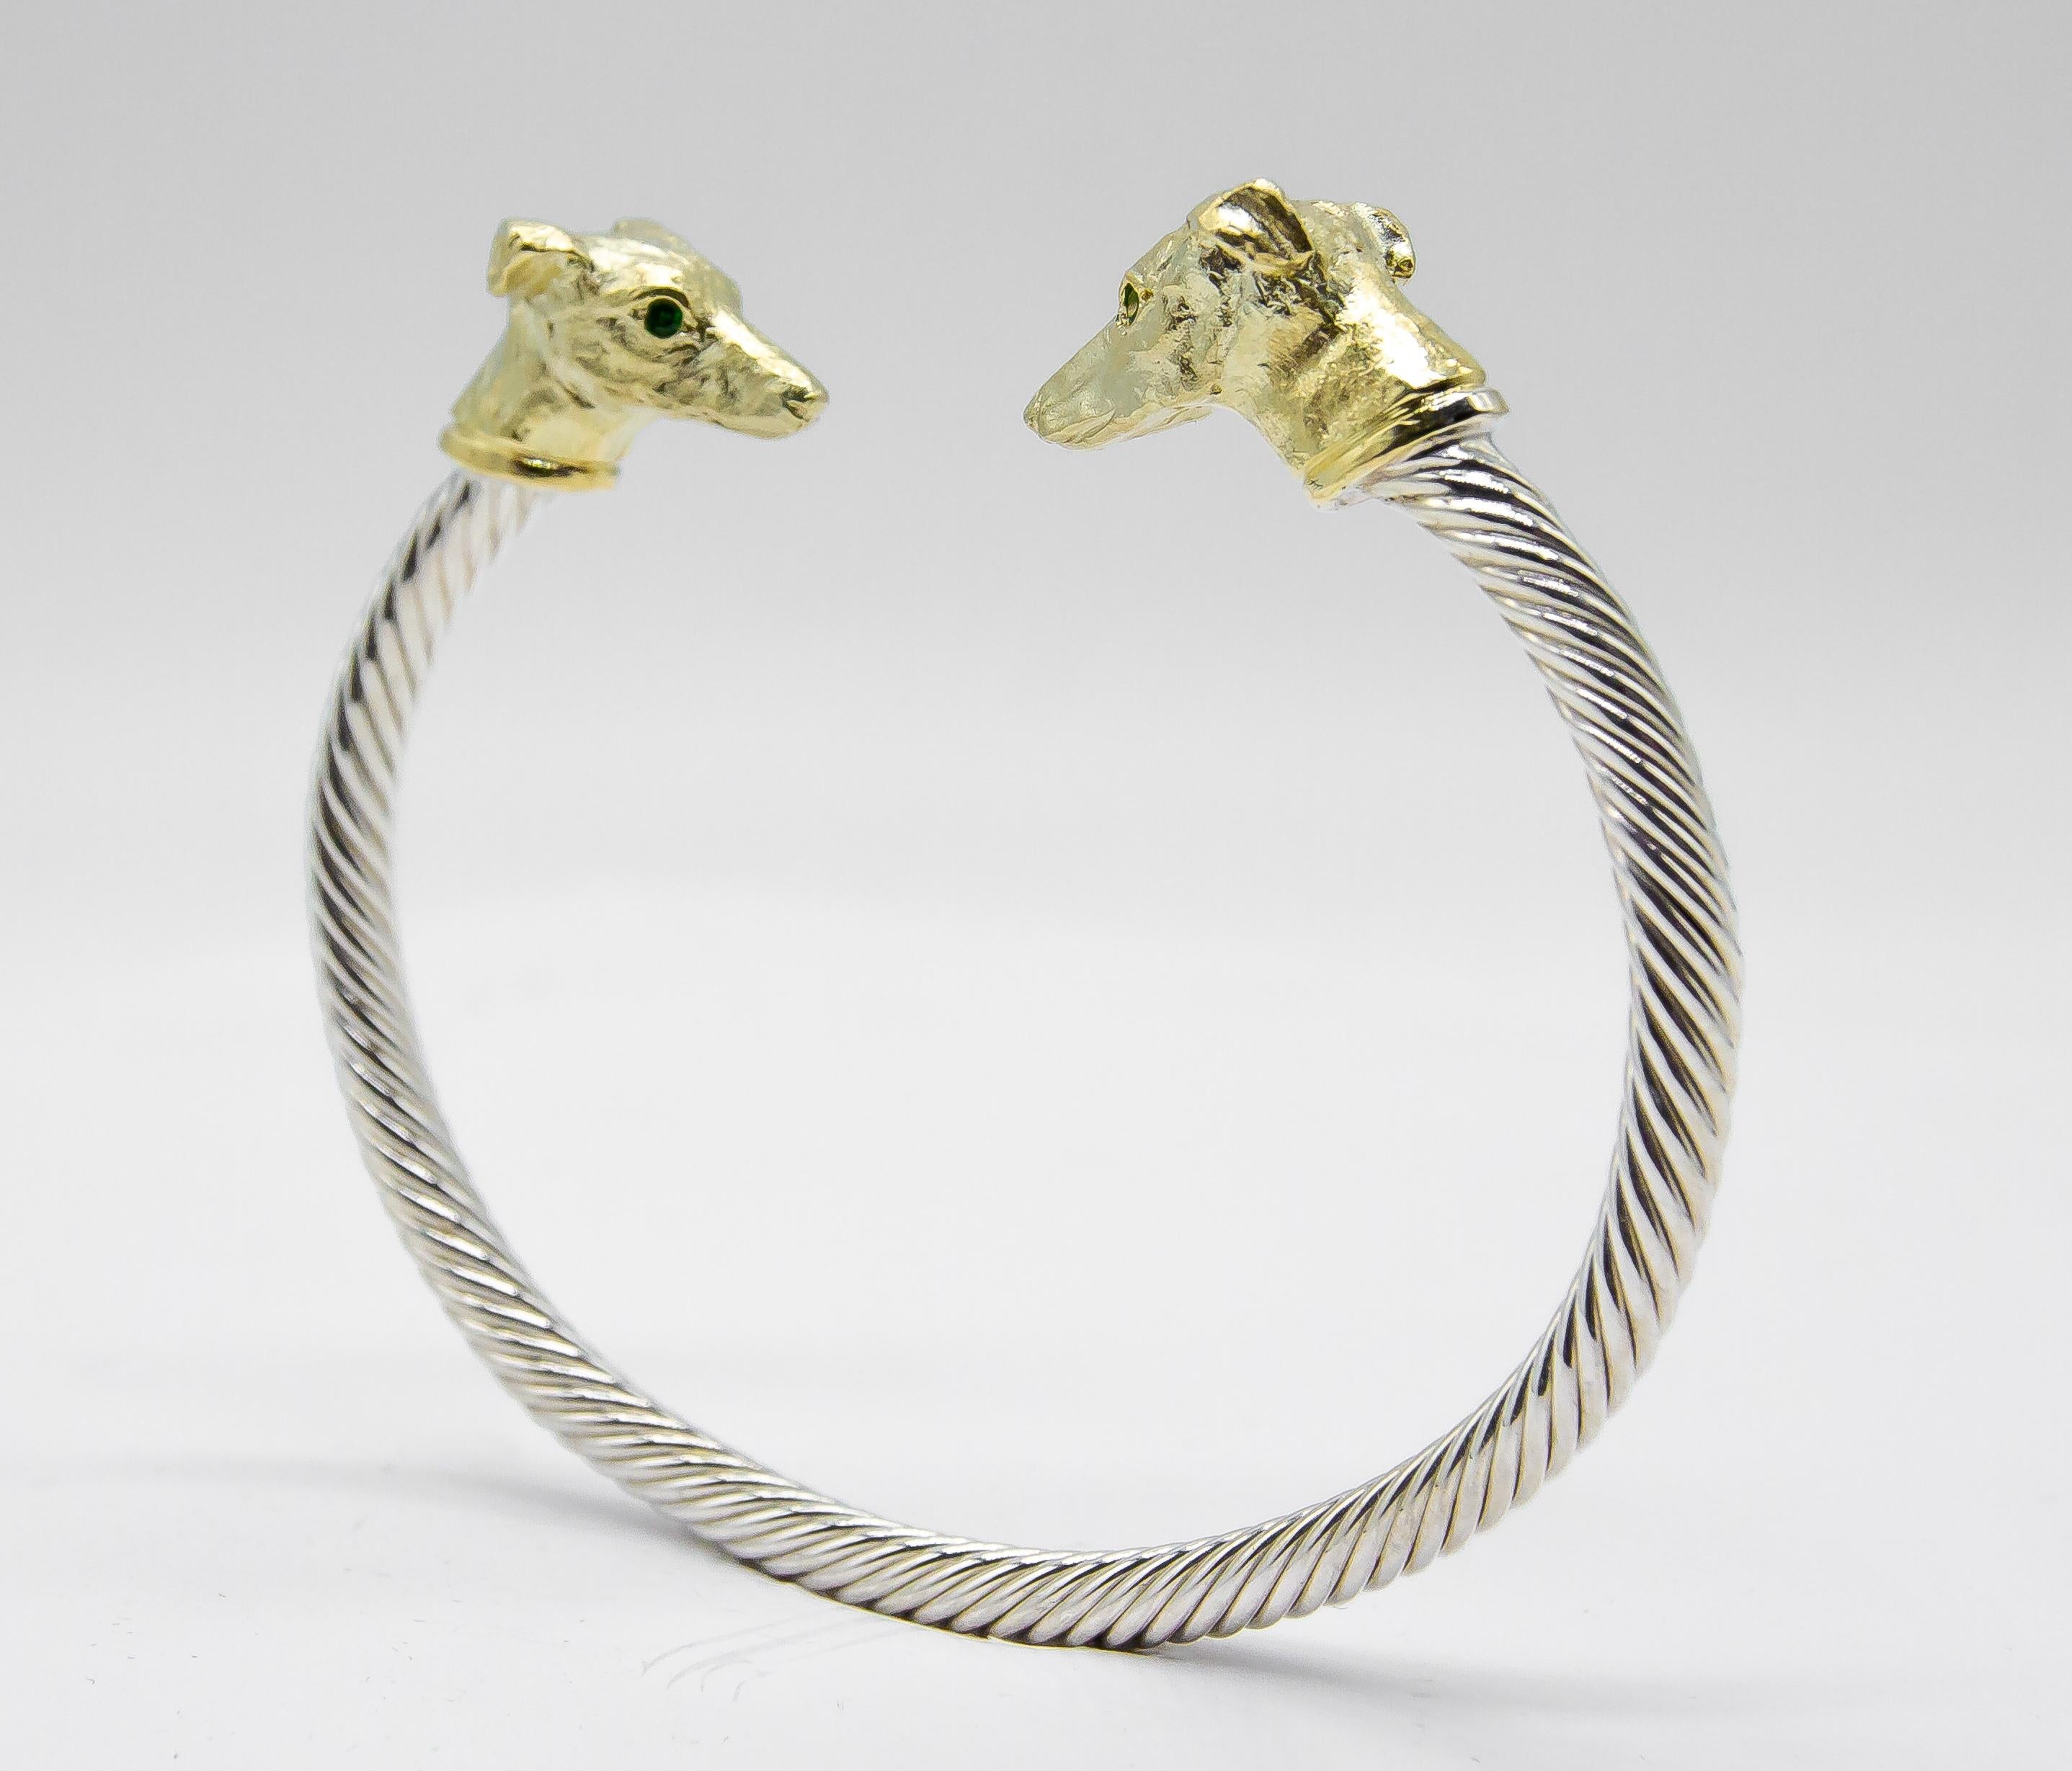 Artist Paul Eaton Sculpted Golden Retriever Heads on Sterling Silver Twisted Bangle For Sale